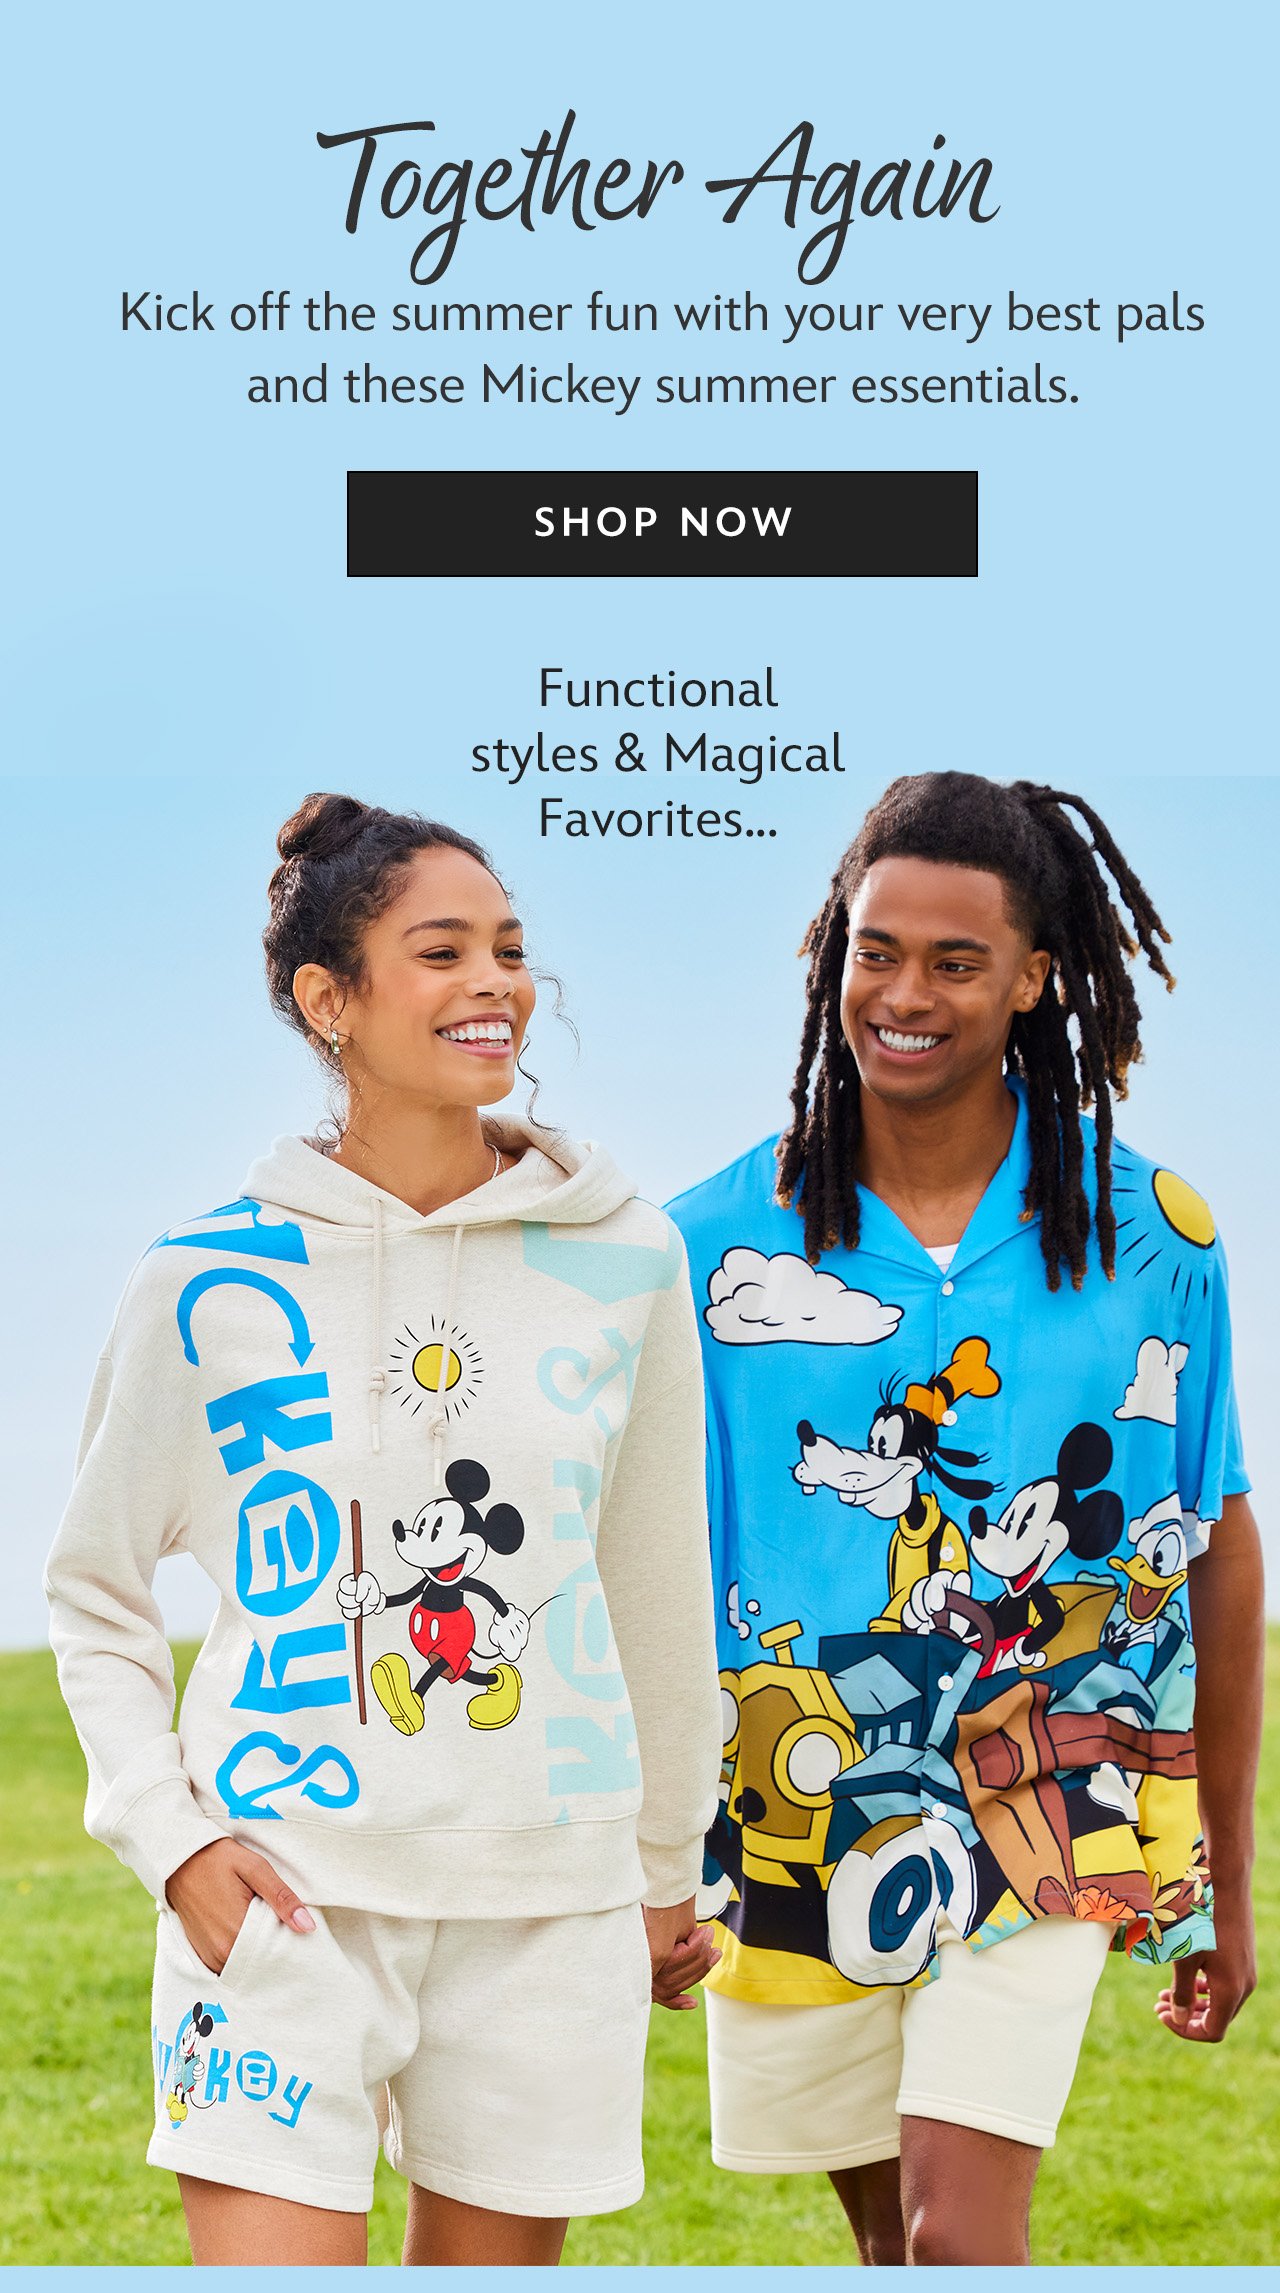 Together Again. Kick off the summer fun with your very best pals and these Mickey summer essentials. Functional styles and Magical favorites... | Shop Now